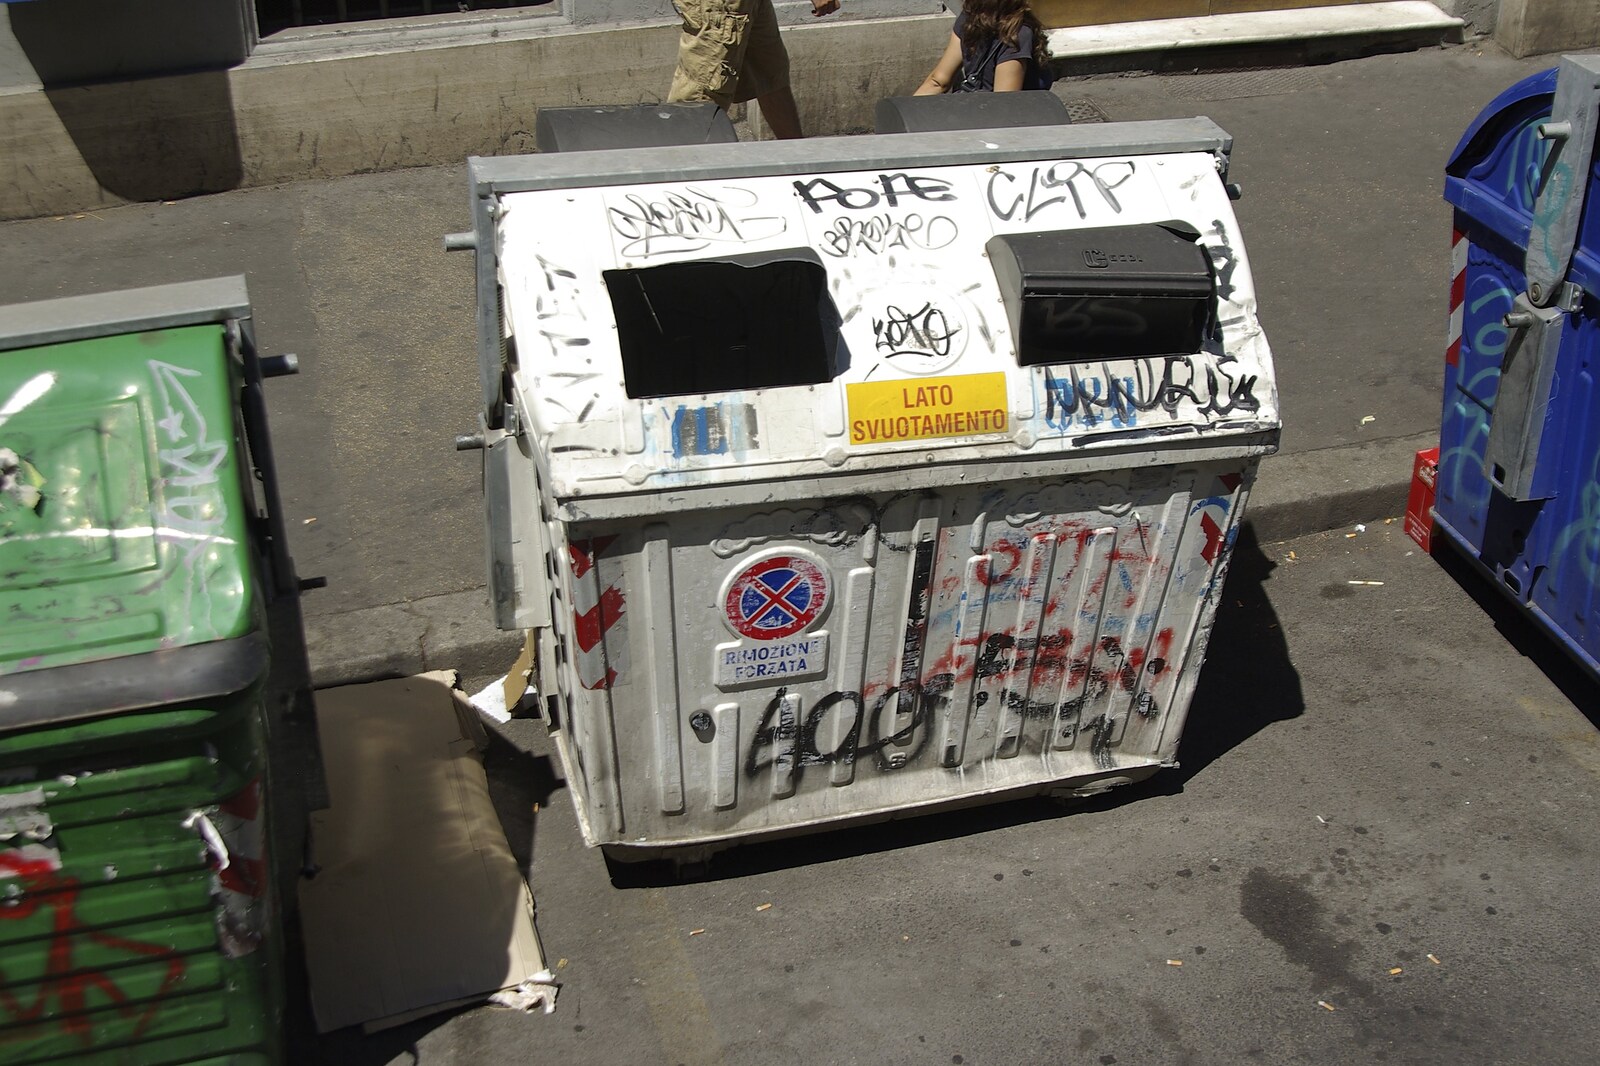 Graffiti'd bins from A Sojourn in The Eternal City, Rome, Italy - 22nd July 2008